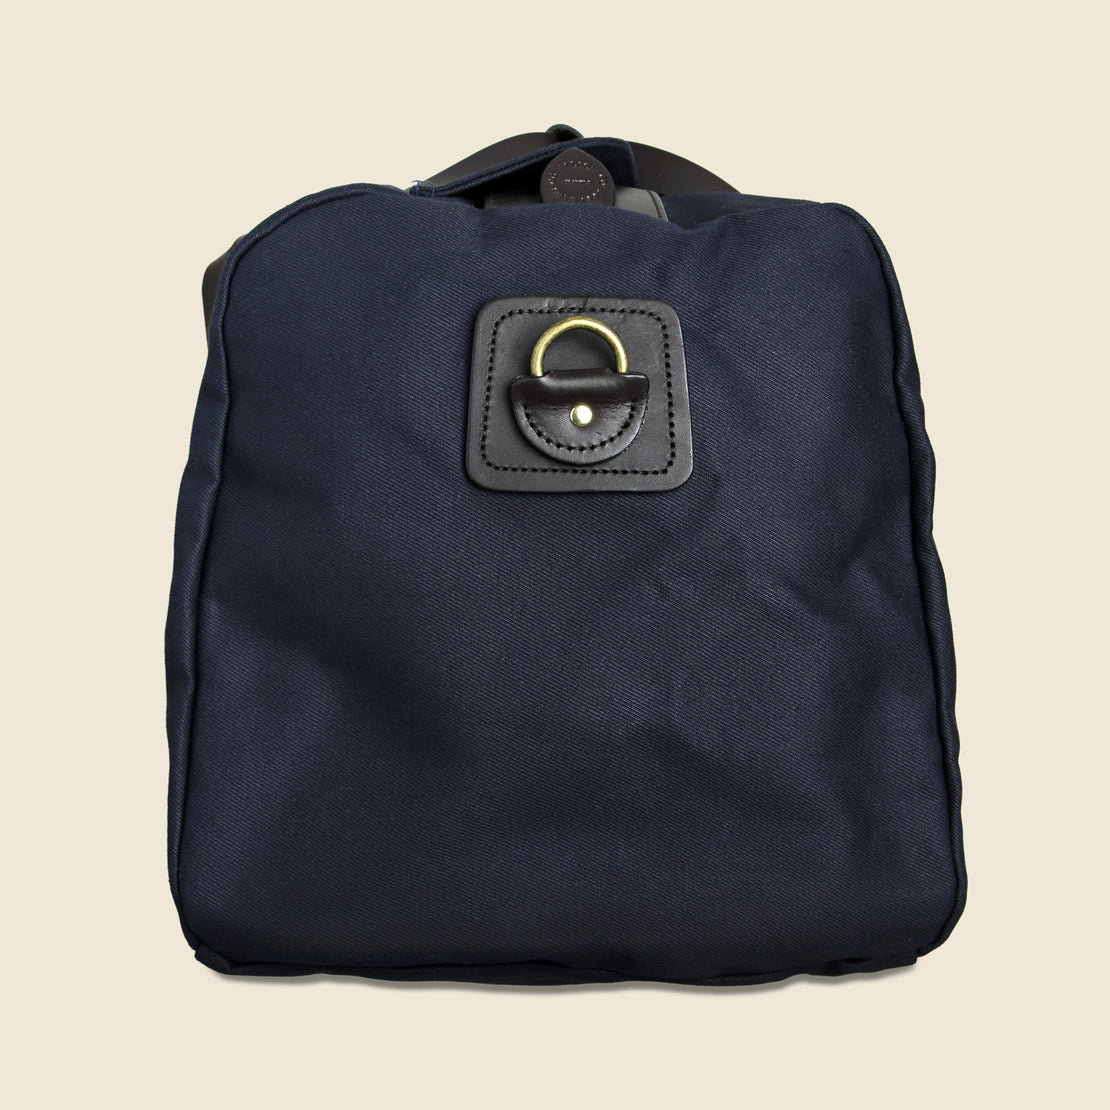 Medium Carry-On Duffle Bag - Navy - Filson - STAG Provisions - Accessories - Bags / Luggage